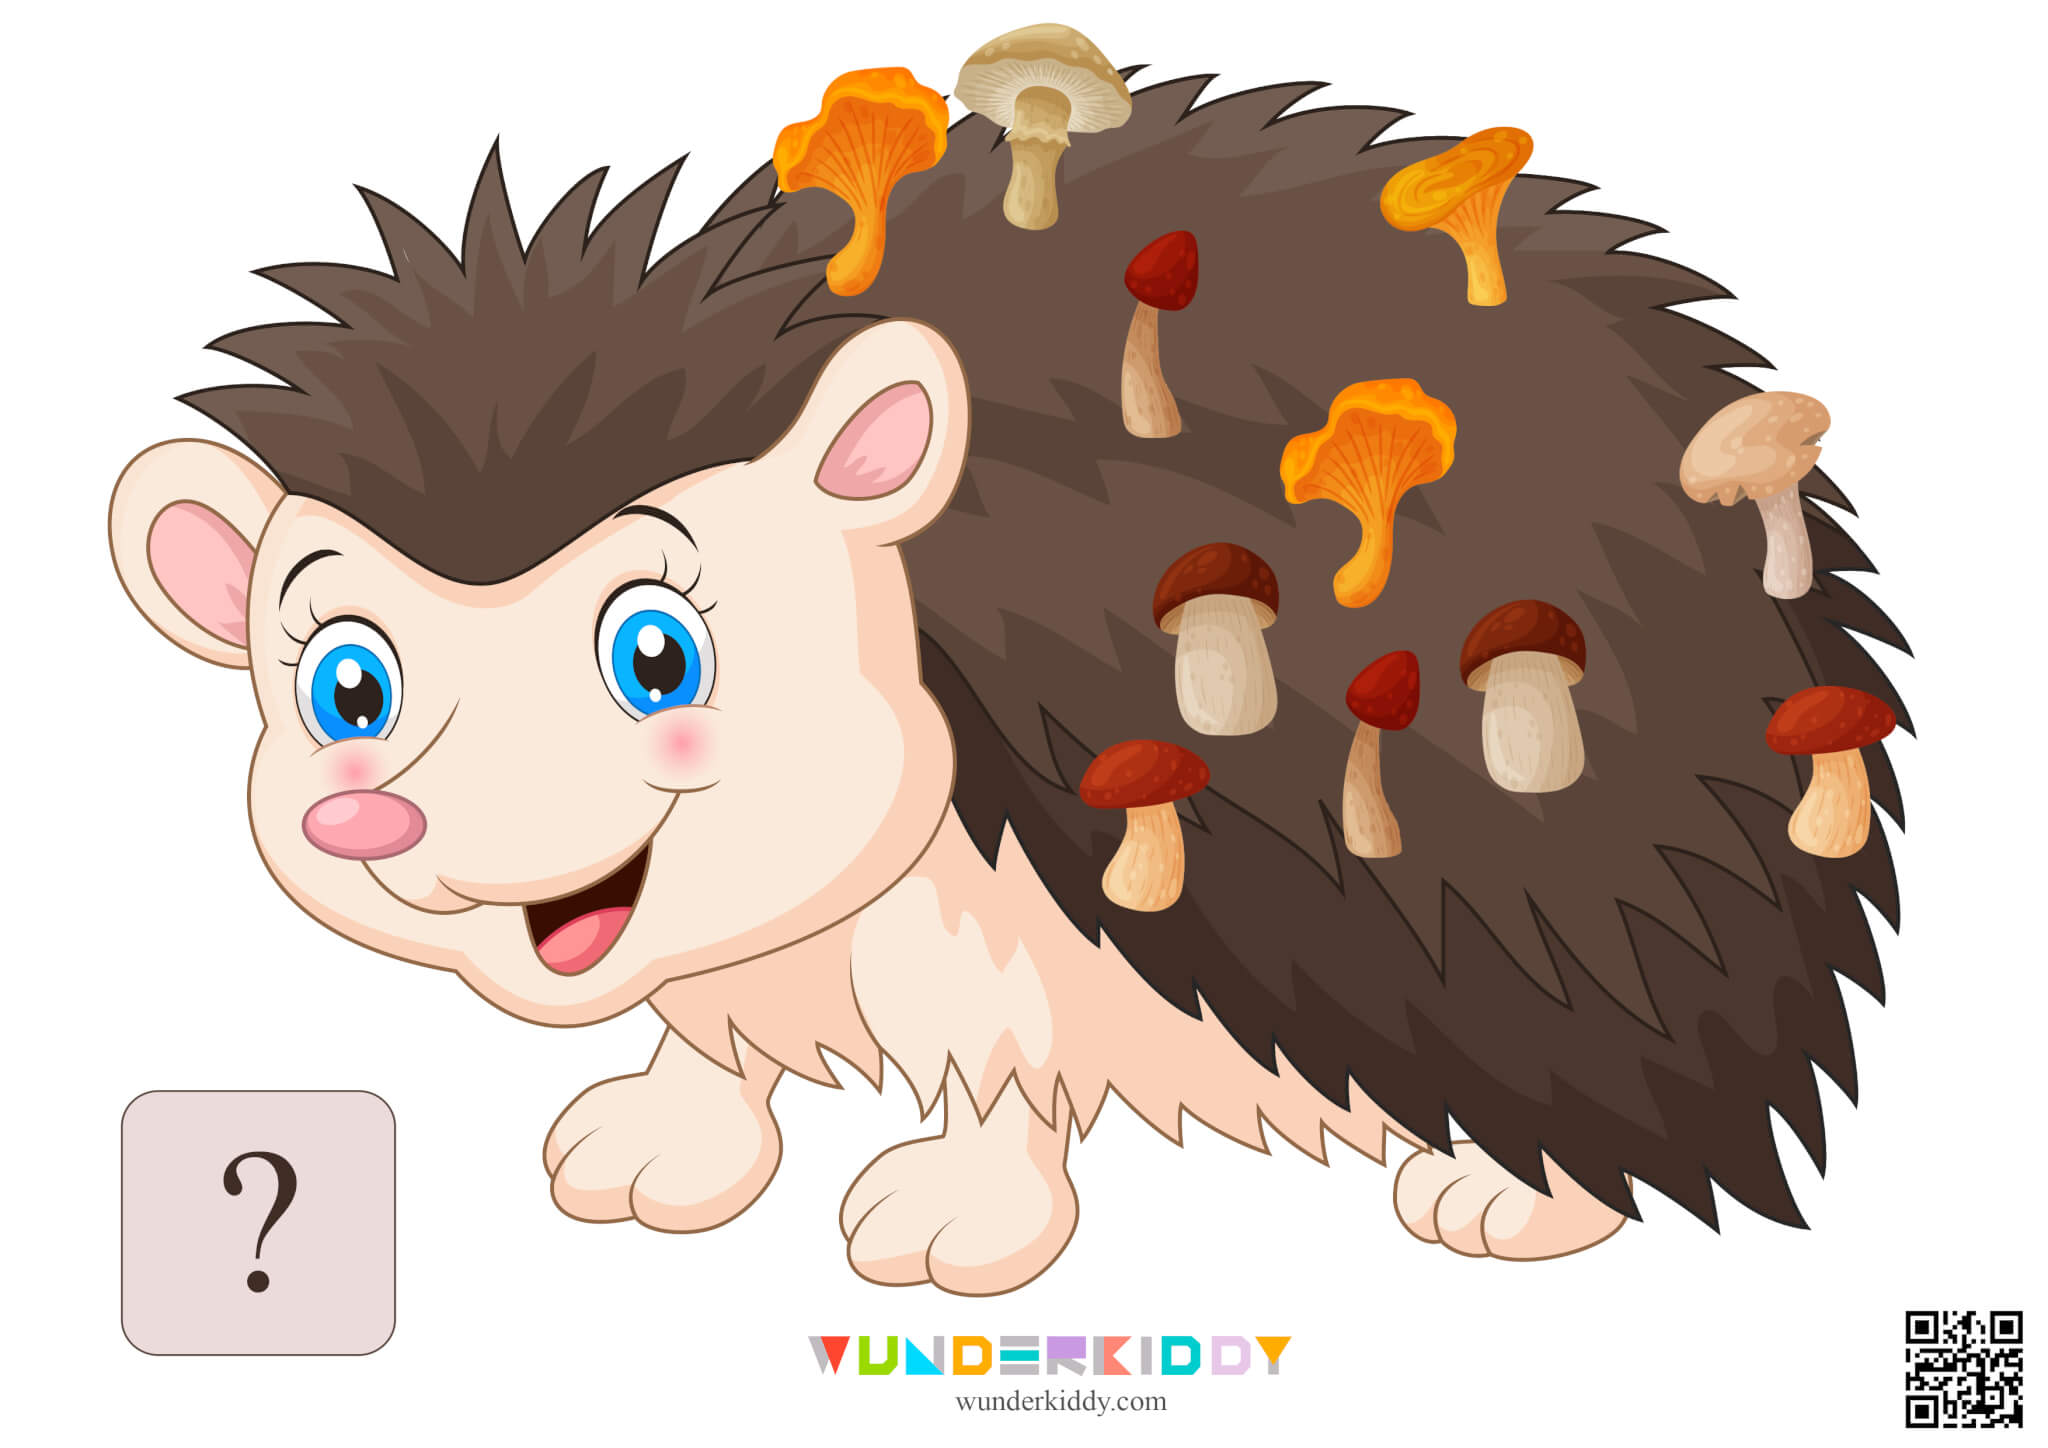 Worksheet Count to 20 with Hedgehog and Mushrooms - Image 15